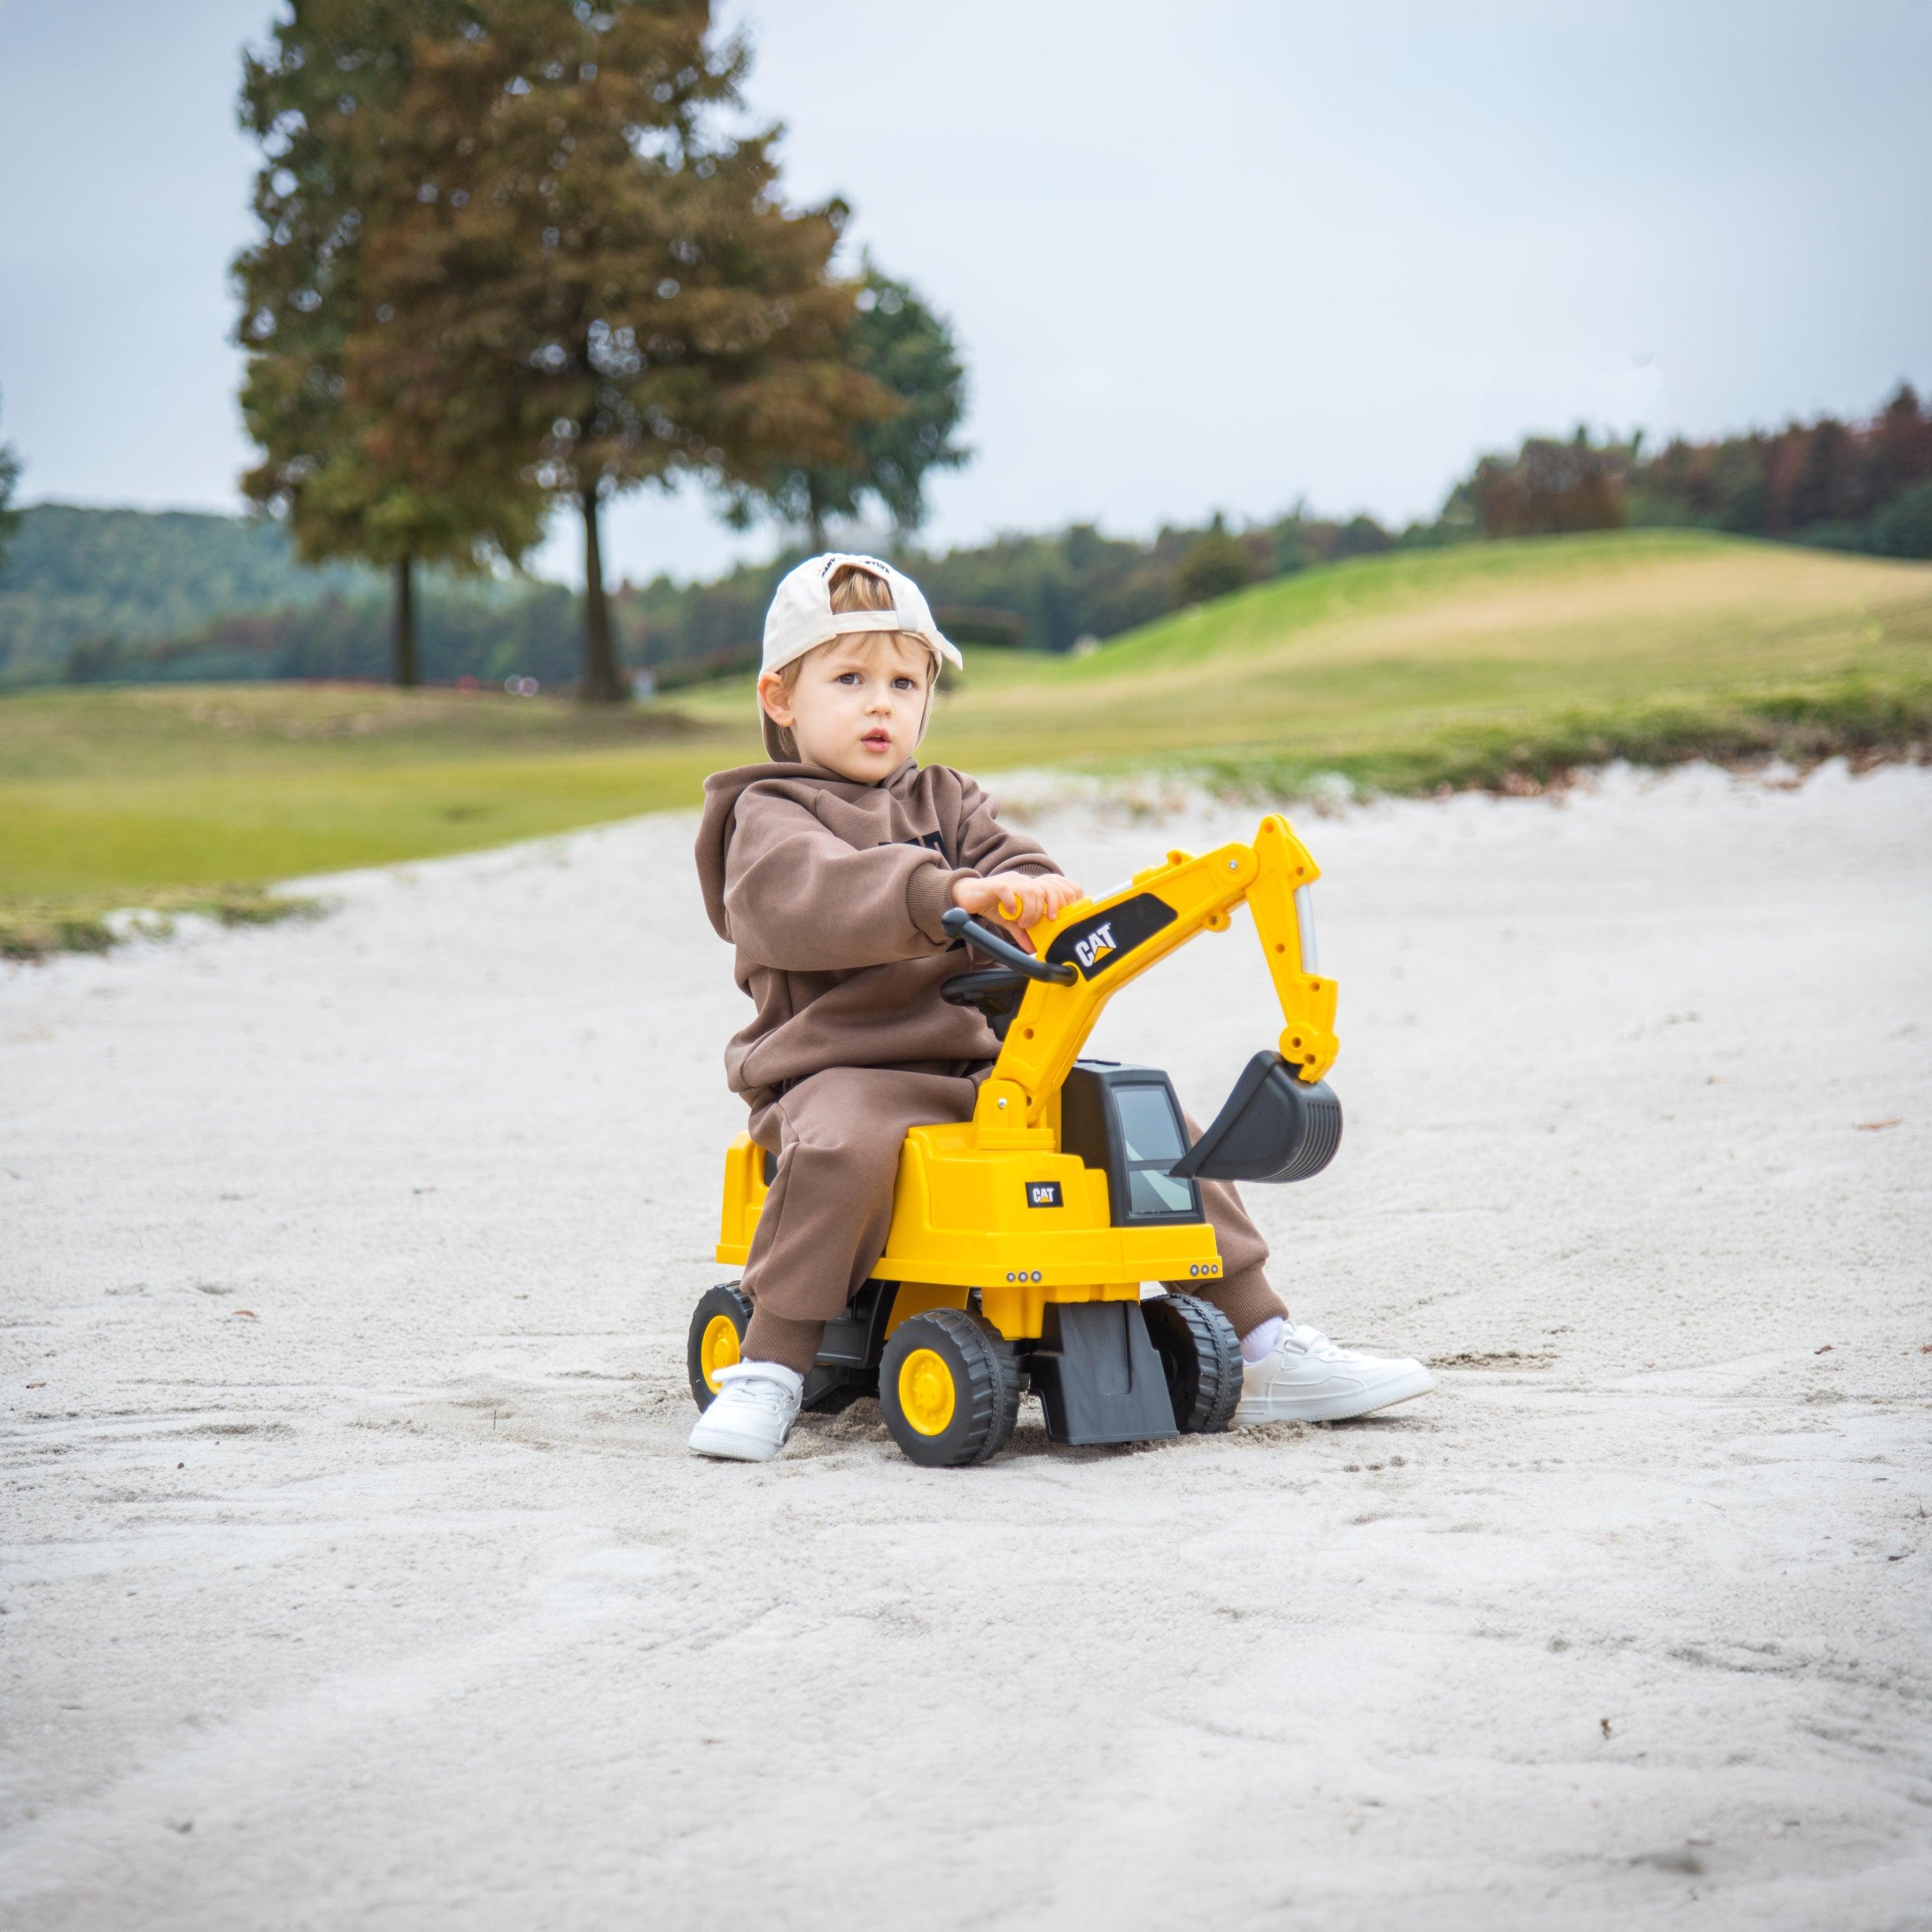 Caterpillar Foot to Floor Ride-On for Toddlers - DTI Direct USA